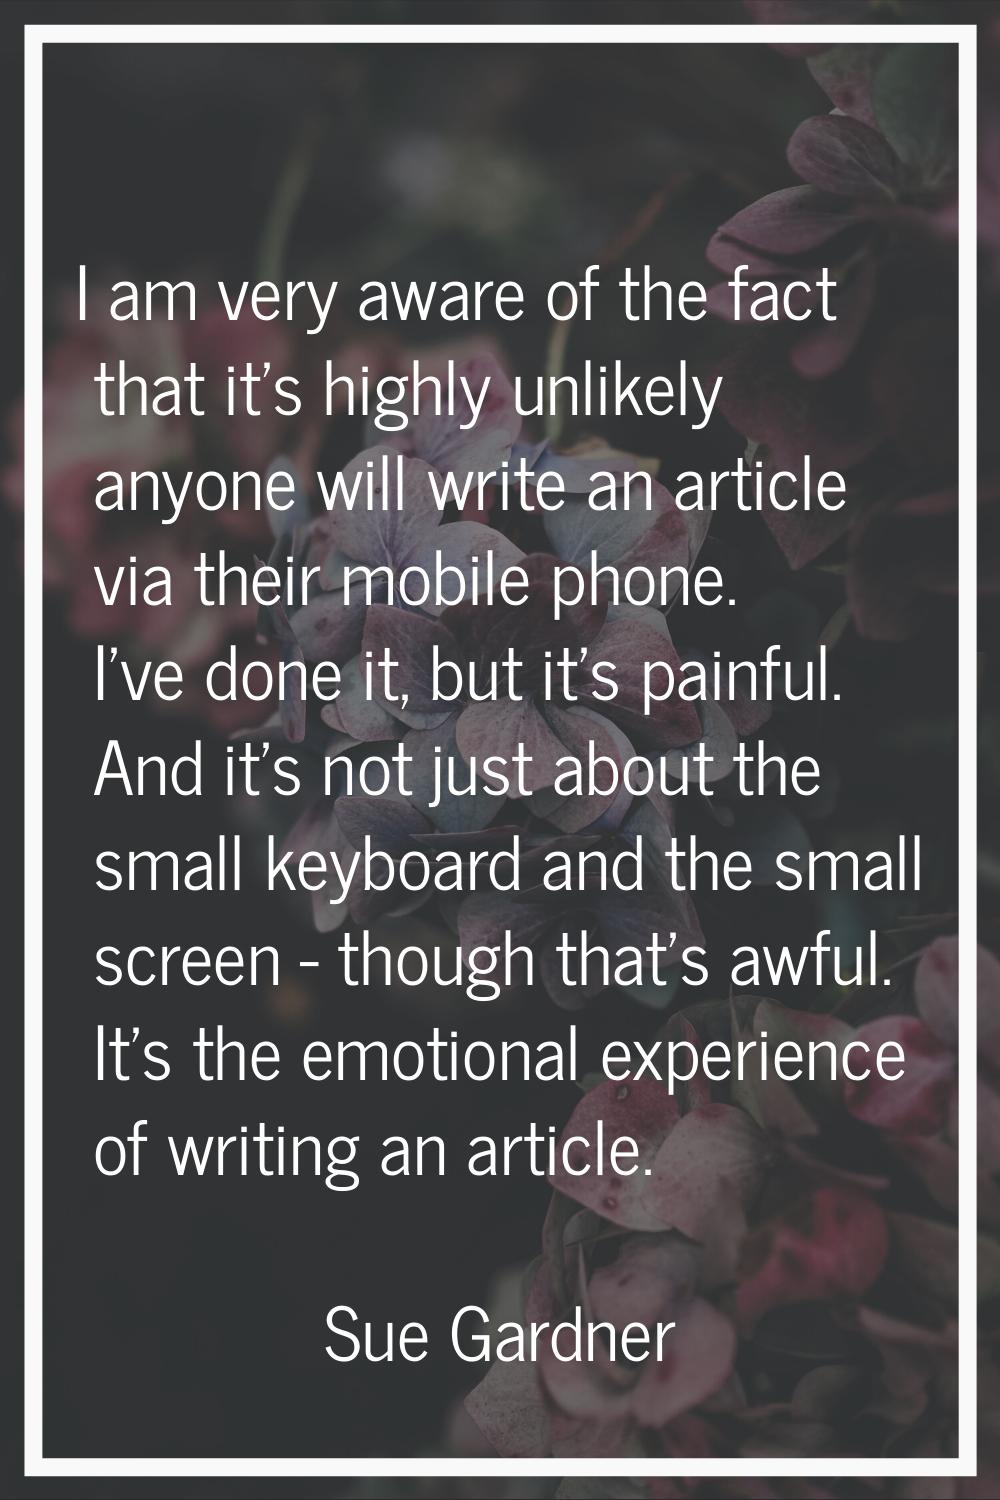 I am very aware of the fact that it's highly unlikely anyone will write an article via their mobile